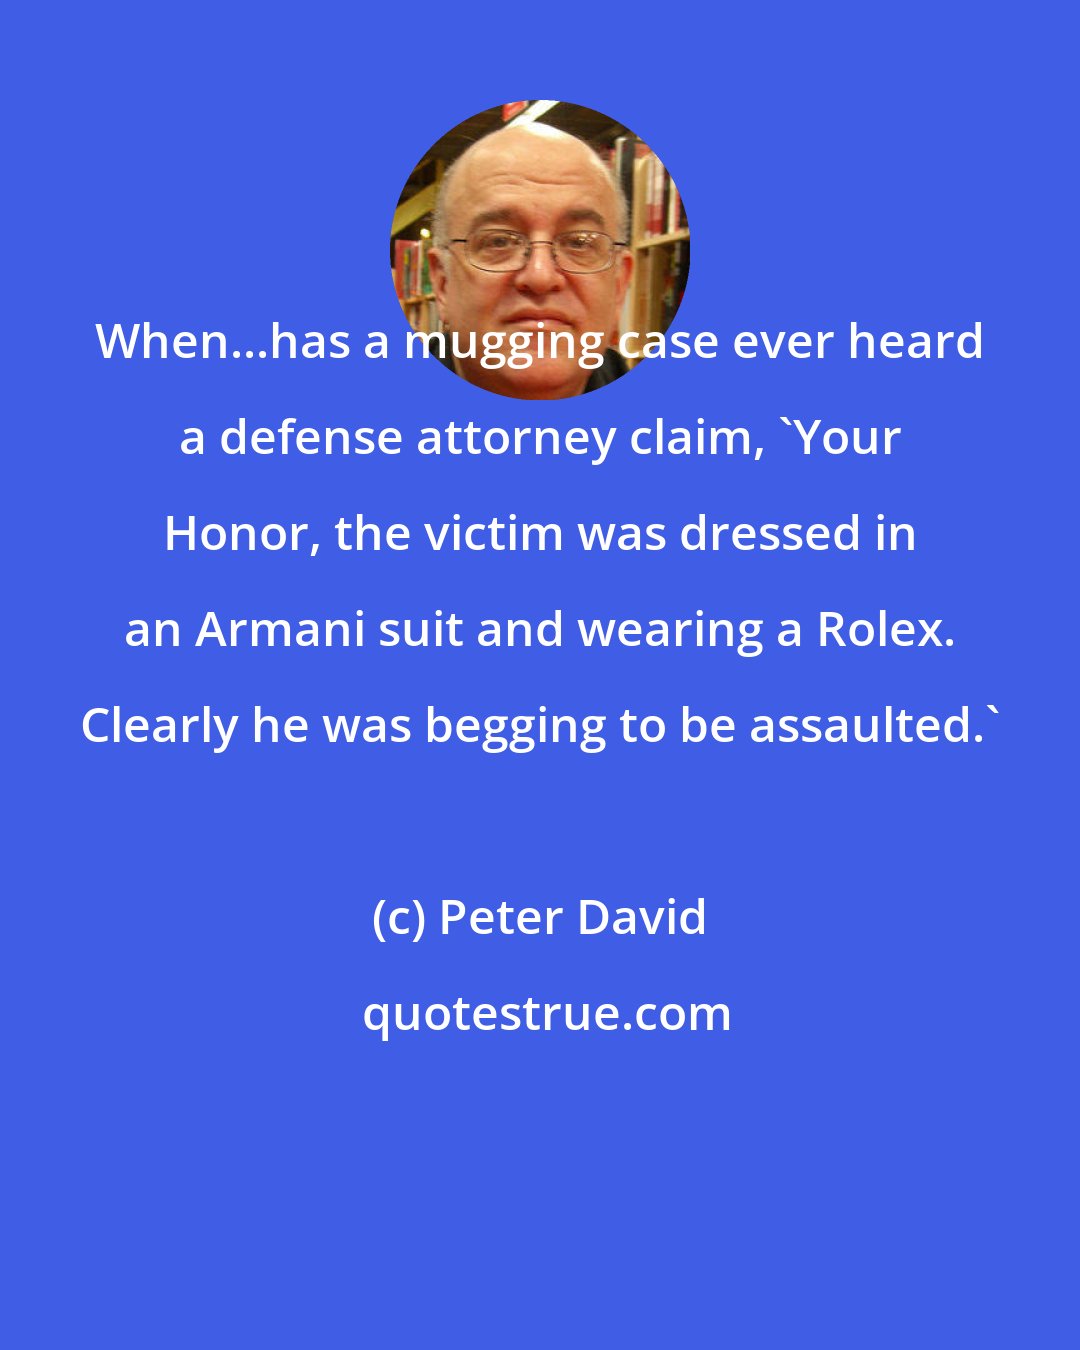 Peter David: When...has a mugging case ever heard a defense attorney claim, 'Your Honor, the victim was dressed in an Armani suit and wearing a Rolex. Clearly he was begging to be assaulted.'